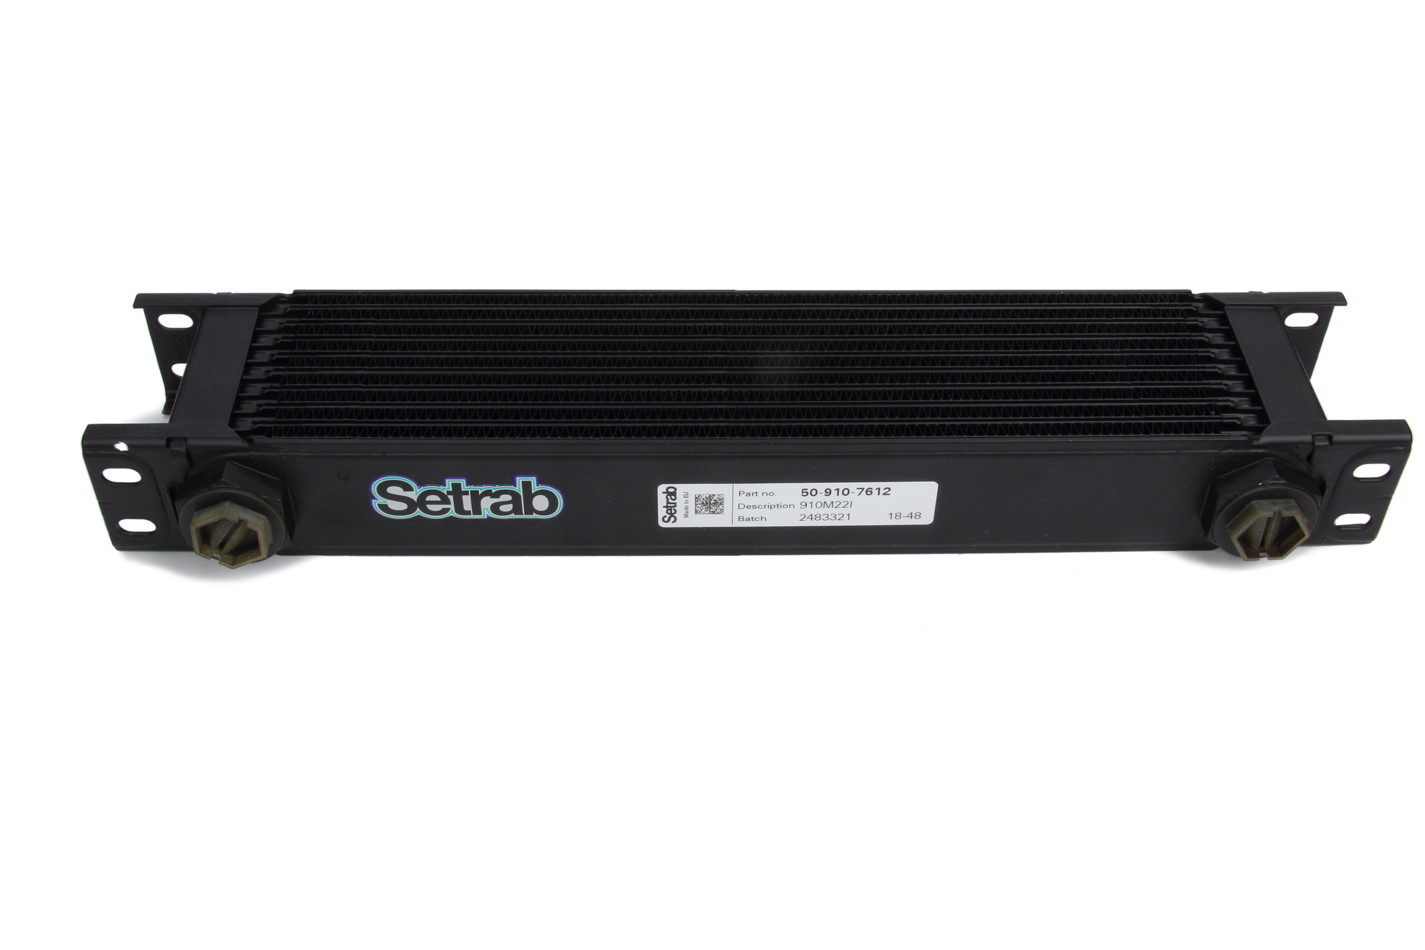 Setrab Oil Coolers 50-910-7612 - Series-9 Oil Cooler 10 Row w/M22 Ports